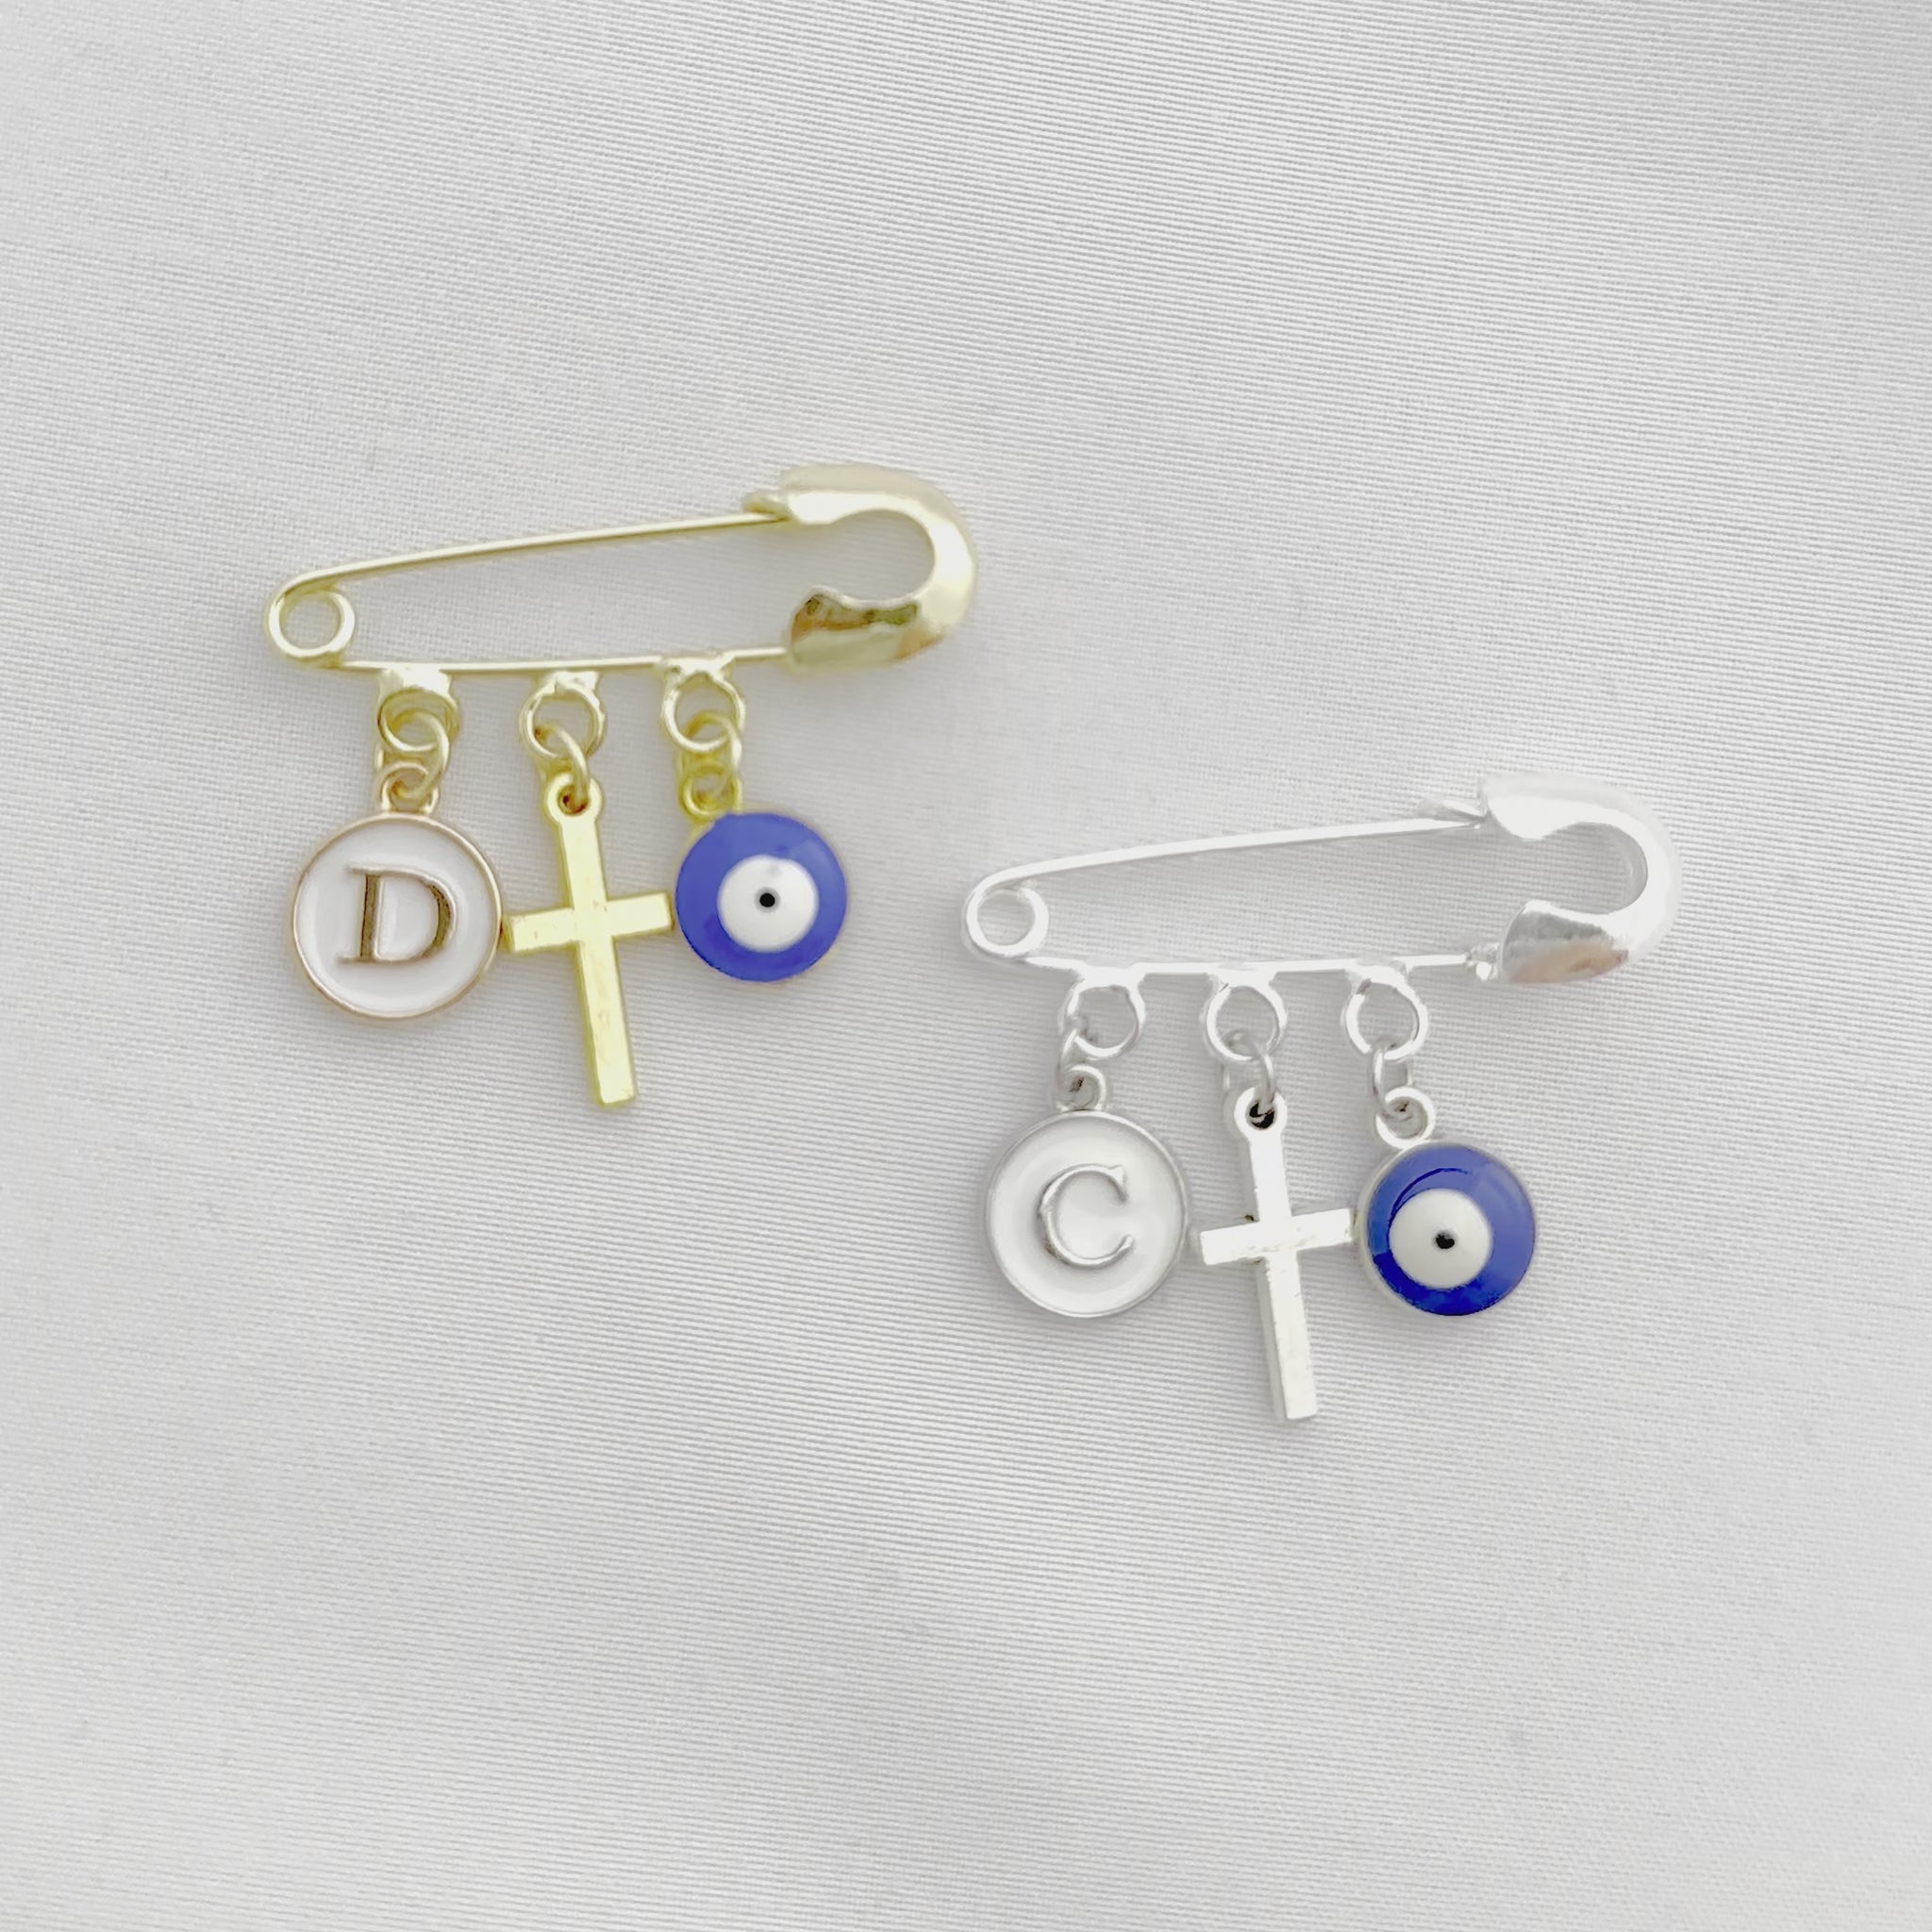 With the Baby Evil Eye Pin (Plain Cross, Gold or Silver pin) you can ensure your little one is always protected, no matter where you go.